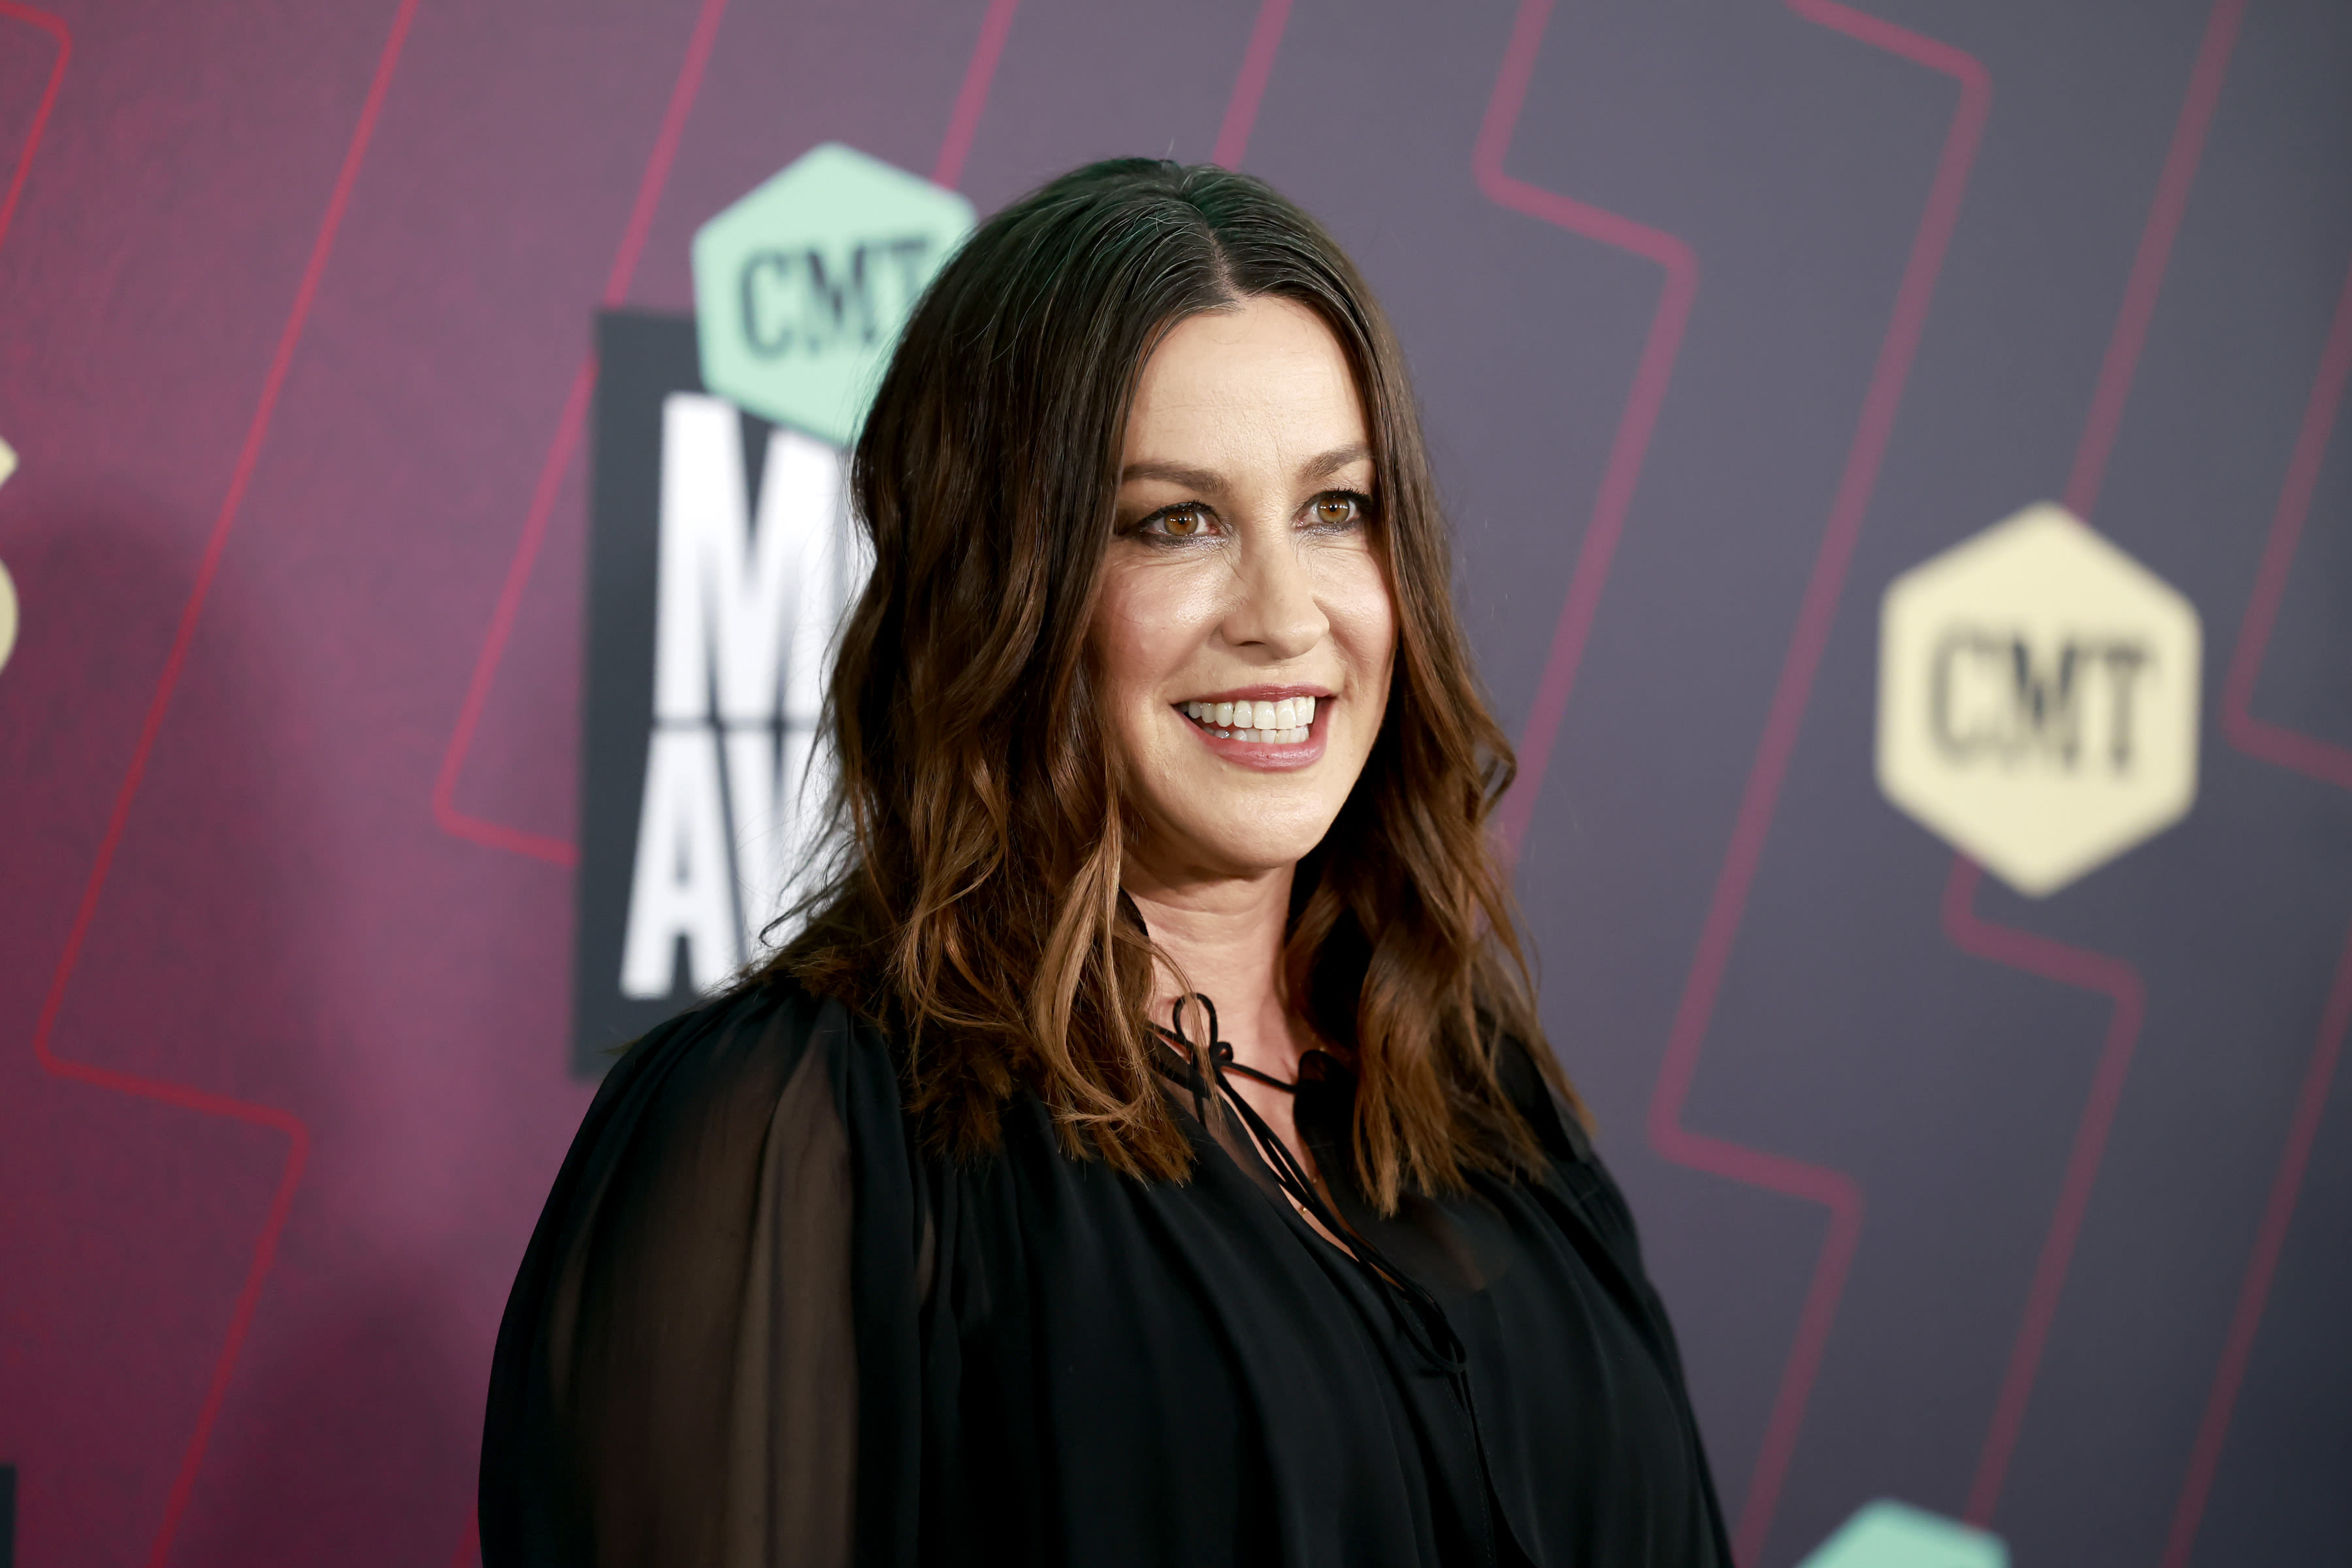 Alanis Morissette says she felt like she was 'slowly dying' amid postpartum depression: 'It's like your whole self disappears'